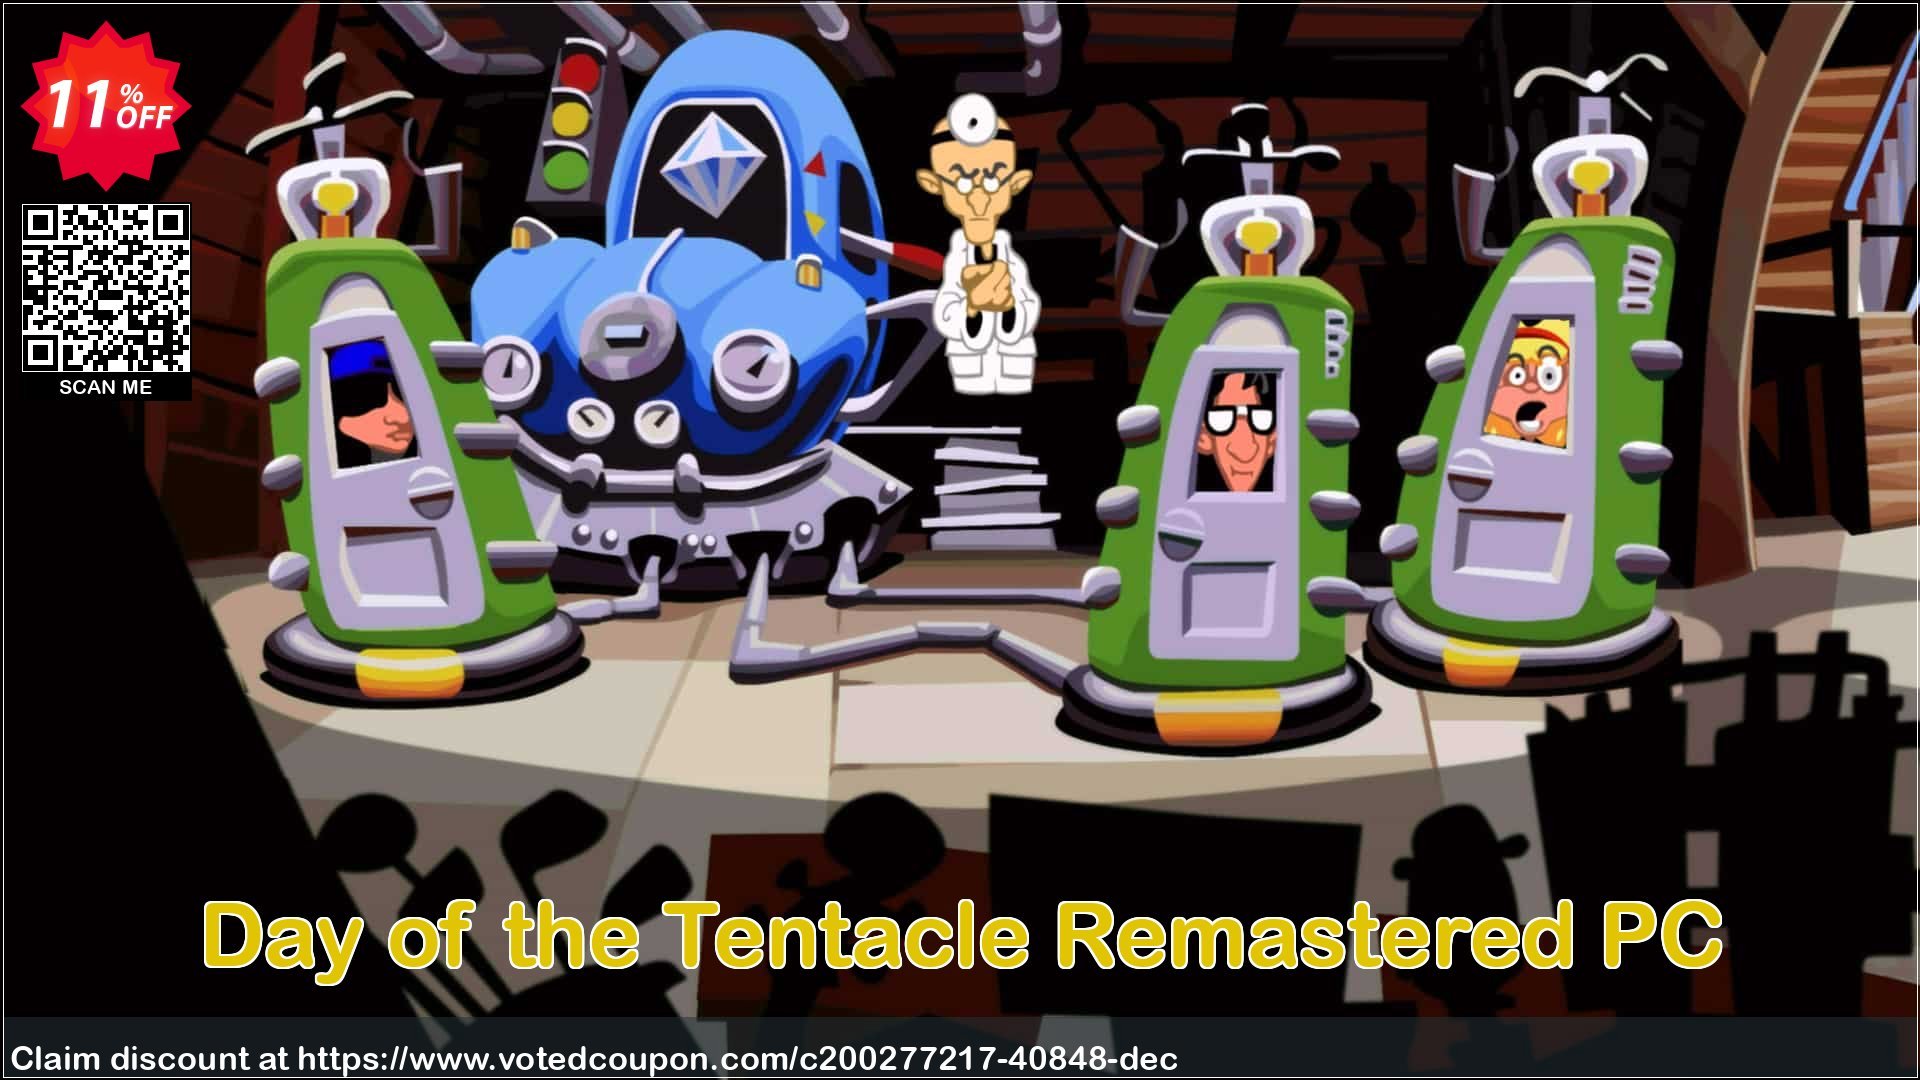 Day of the Tentacle Remastered PC Coupon Code May 2024, 11% OFF - VotedCoupon